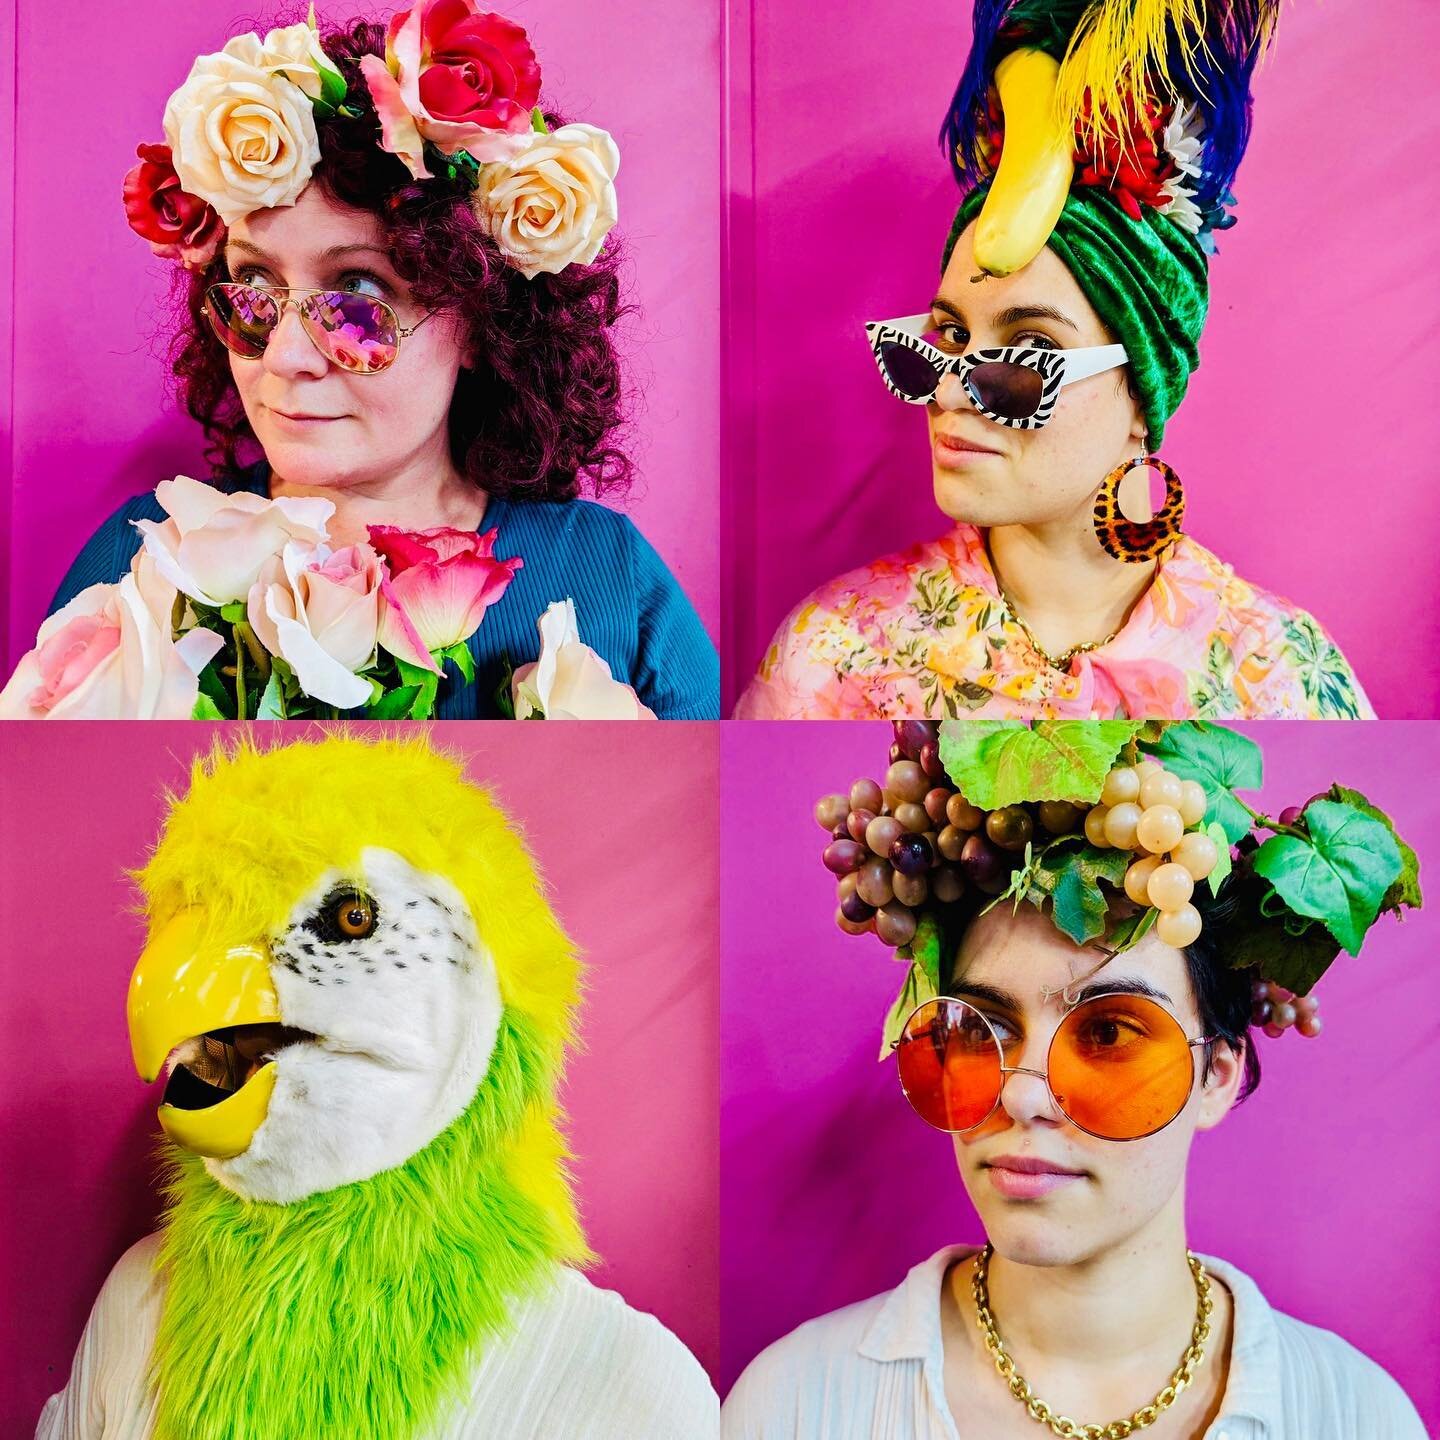 Don&rsquo;t let the humidity put you off wearing an awesome costume - just go with the heat madness! Put some fruit on your head! Be a budgie! 🍊🍍🐤🍐🍒